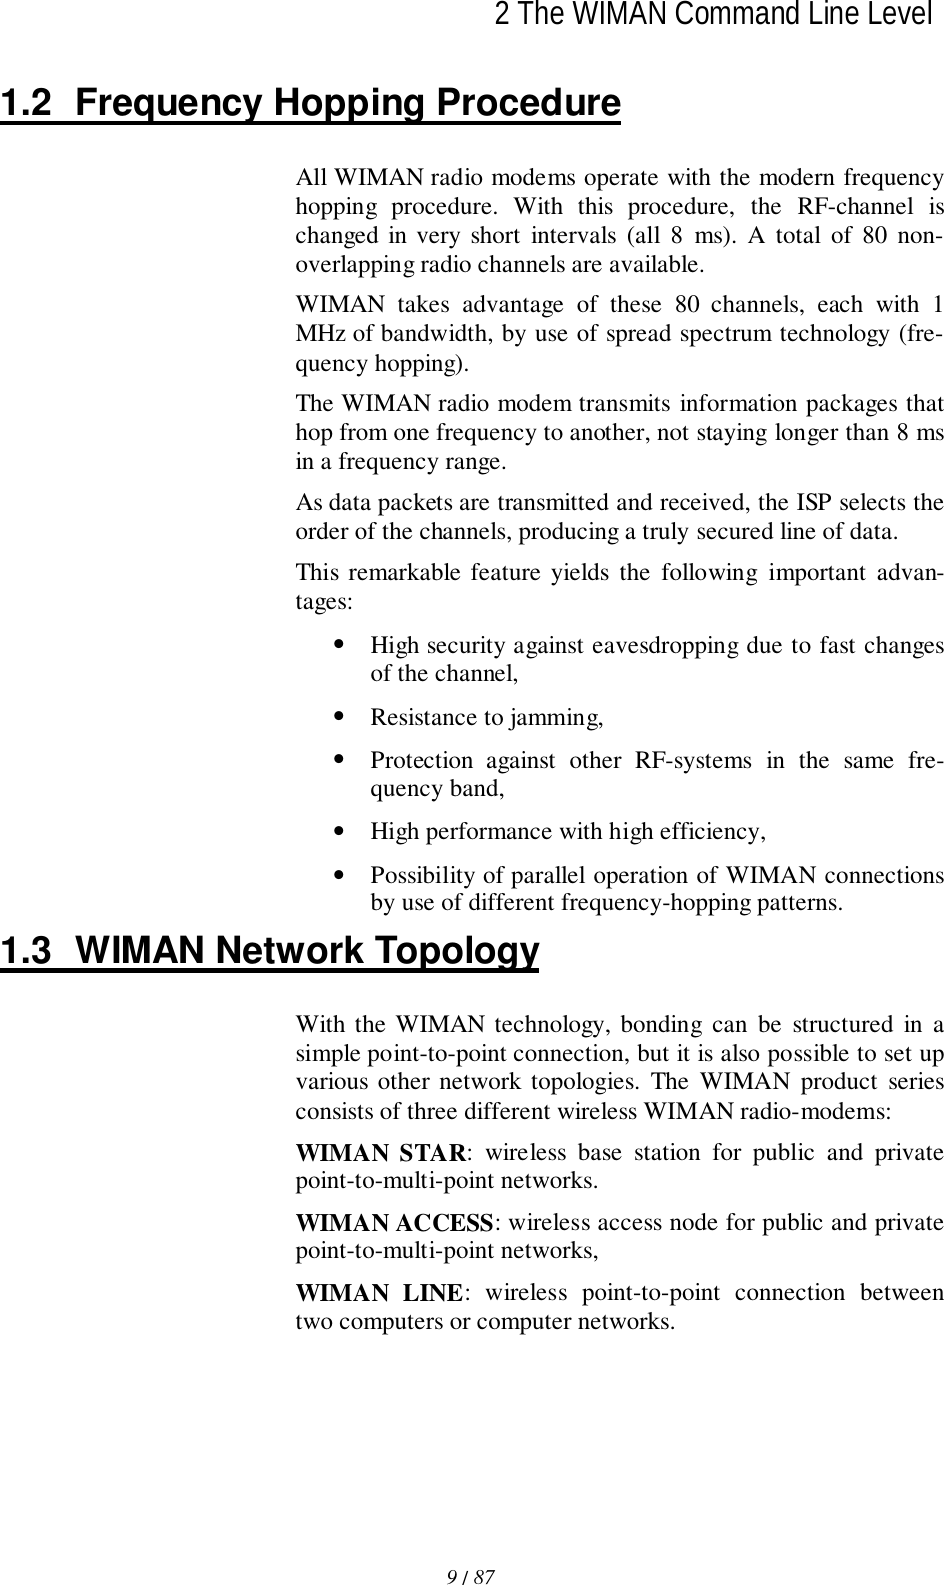 2 The WIMAN Command Line Level9 / 87l1.2  Frequency Hopping ProcedureAll WIMAN radio modems operate with the modern frequencyhopping procedure. With this procedure, the RF-channel ischanged in very short intervals (all 8 ms). A total of 80 non-overlapping radio channels are available.WIMAN takes advantage of these 80 channels, each with 1MHz of bandwidth, by use of spread spectrum technology (fre-quency hopping).The WIMAN radio modem transmits information packages thathop from one frequency to another, not staying longer than 8 msin a frequency range.As data packets are transmitted and received, the ISP selects theorder of the channels, producing a truly secured line of data.This remarkable feature yields the following important advan-tages:• High security against eavesdropping due to fast changesof the channel,• Resistance to jamming,• Protection against other RF-systems in the same fre-quency band,• High performance with high efficiency,• Possibility of parallel operation of WIMAN connectionsby use of different frequency-hopping patterns.1.3  WIMAN Network TopologyWith the WIMAN technology, bonding can be structured in asimple point-to-point connection, but it is also possible to set upvarious other network topologies. The WIMAN product seriesconsists of three different wireless WIMAN radio-modems:WIMAN STAR: wireless base station for public and privatepoint-to-multi-point networks.WIMAN ACCESS: wireless access node for public and privatepoint-to-multi-point networks,WIMAN LINE: wireless point-to-point connection betweentwo computers or computer networks.